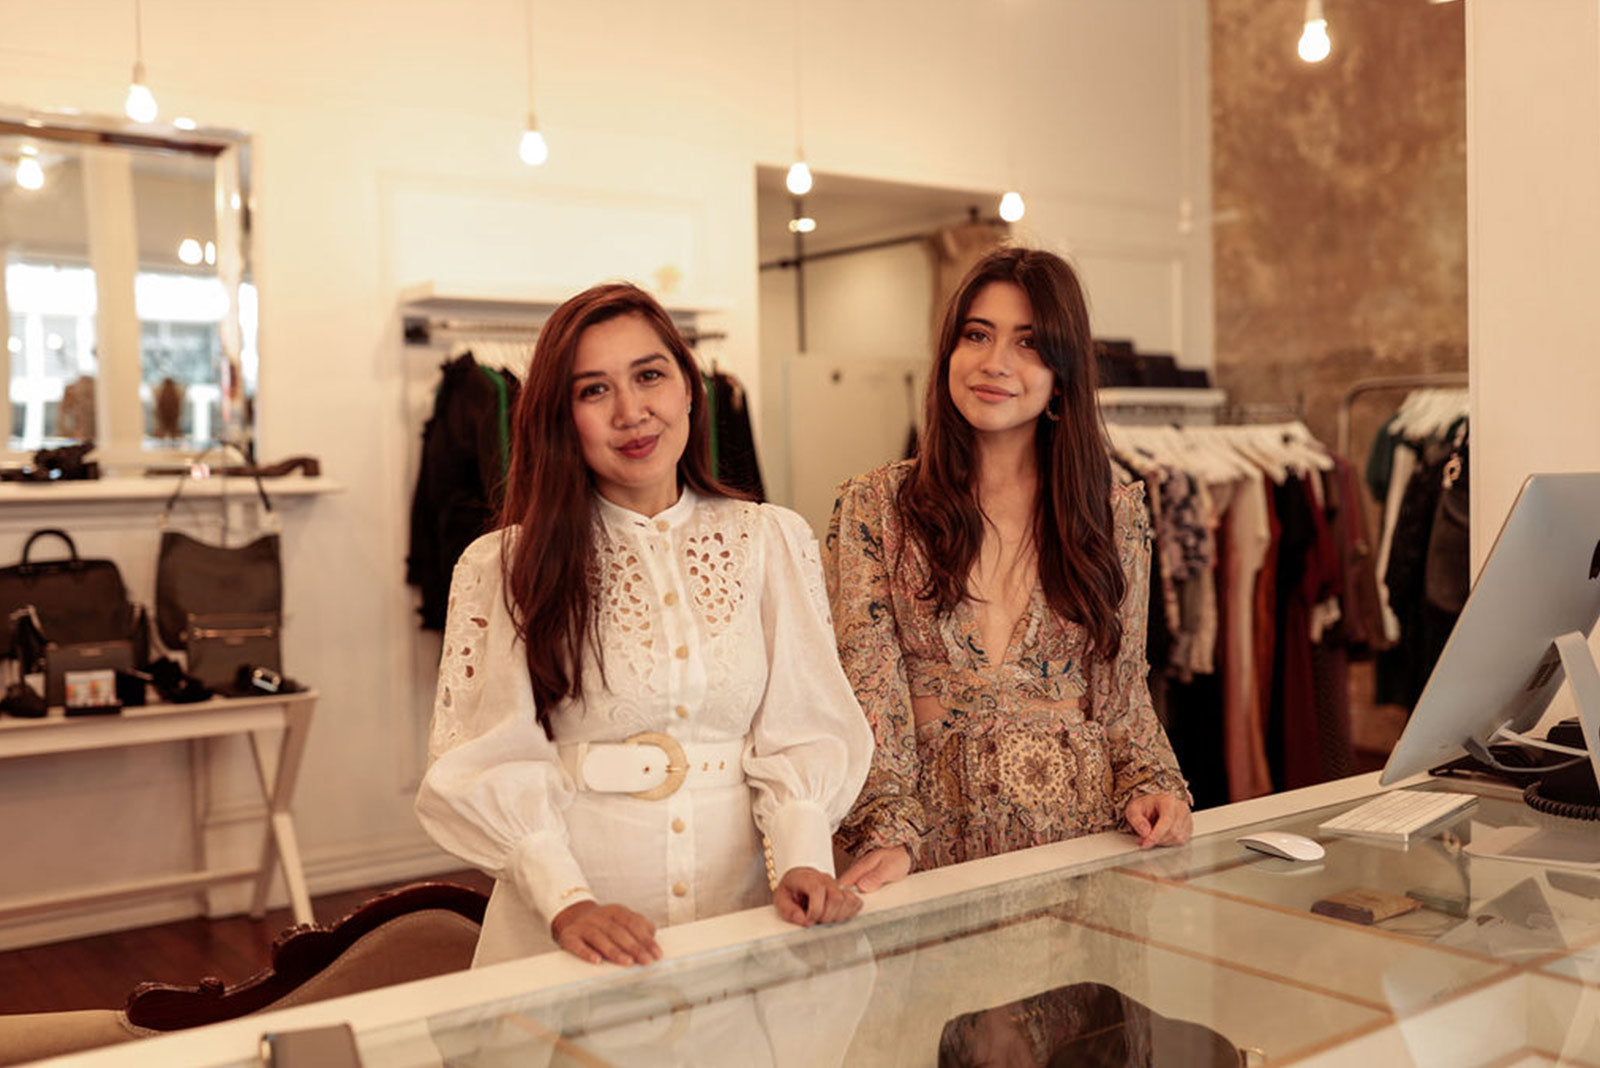 Shop Local | We talk to Sophea and Emily from Coco Wellington